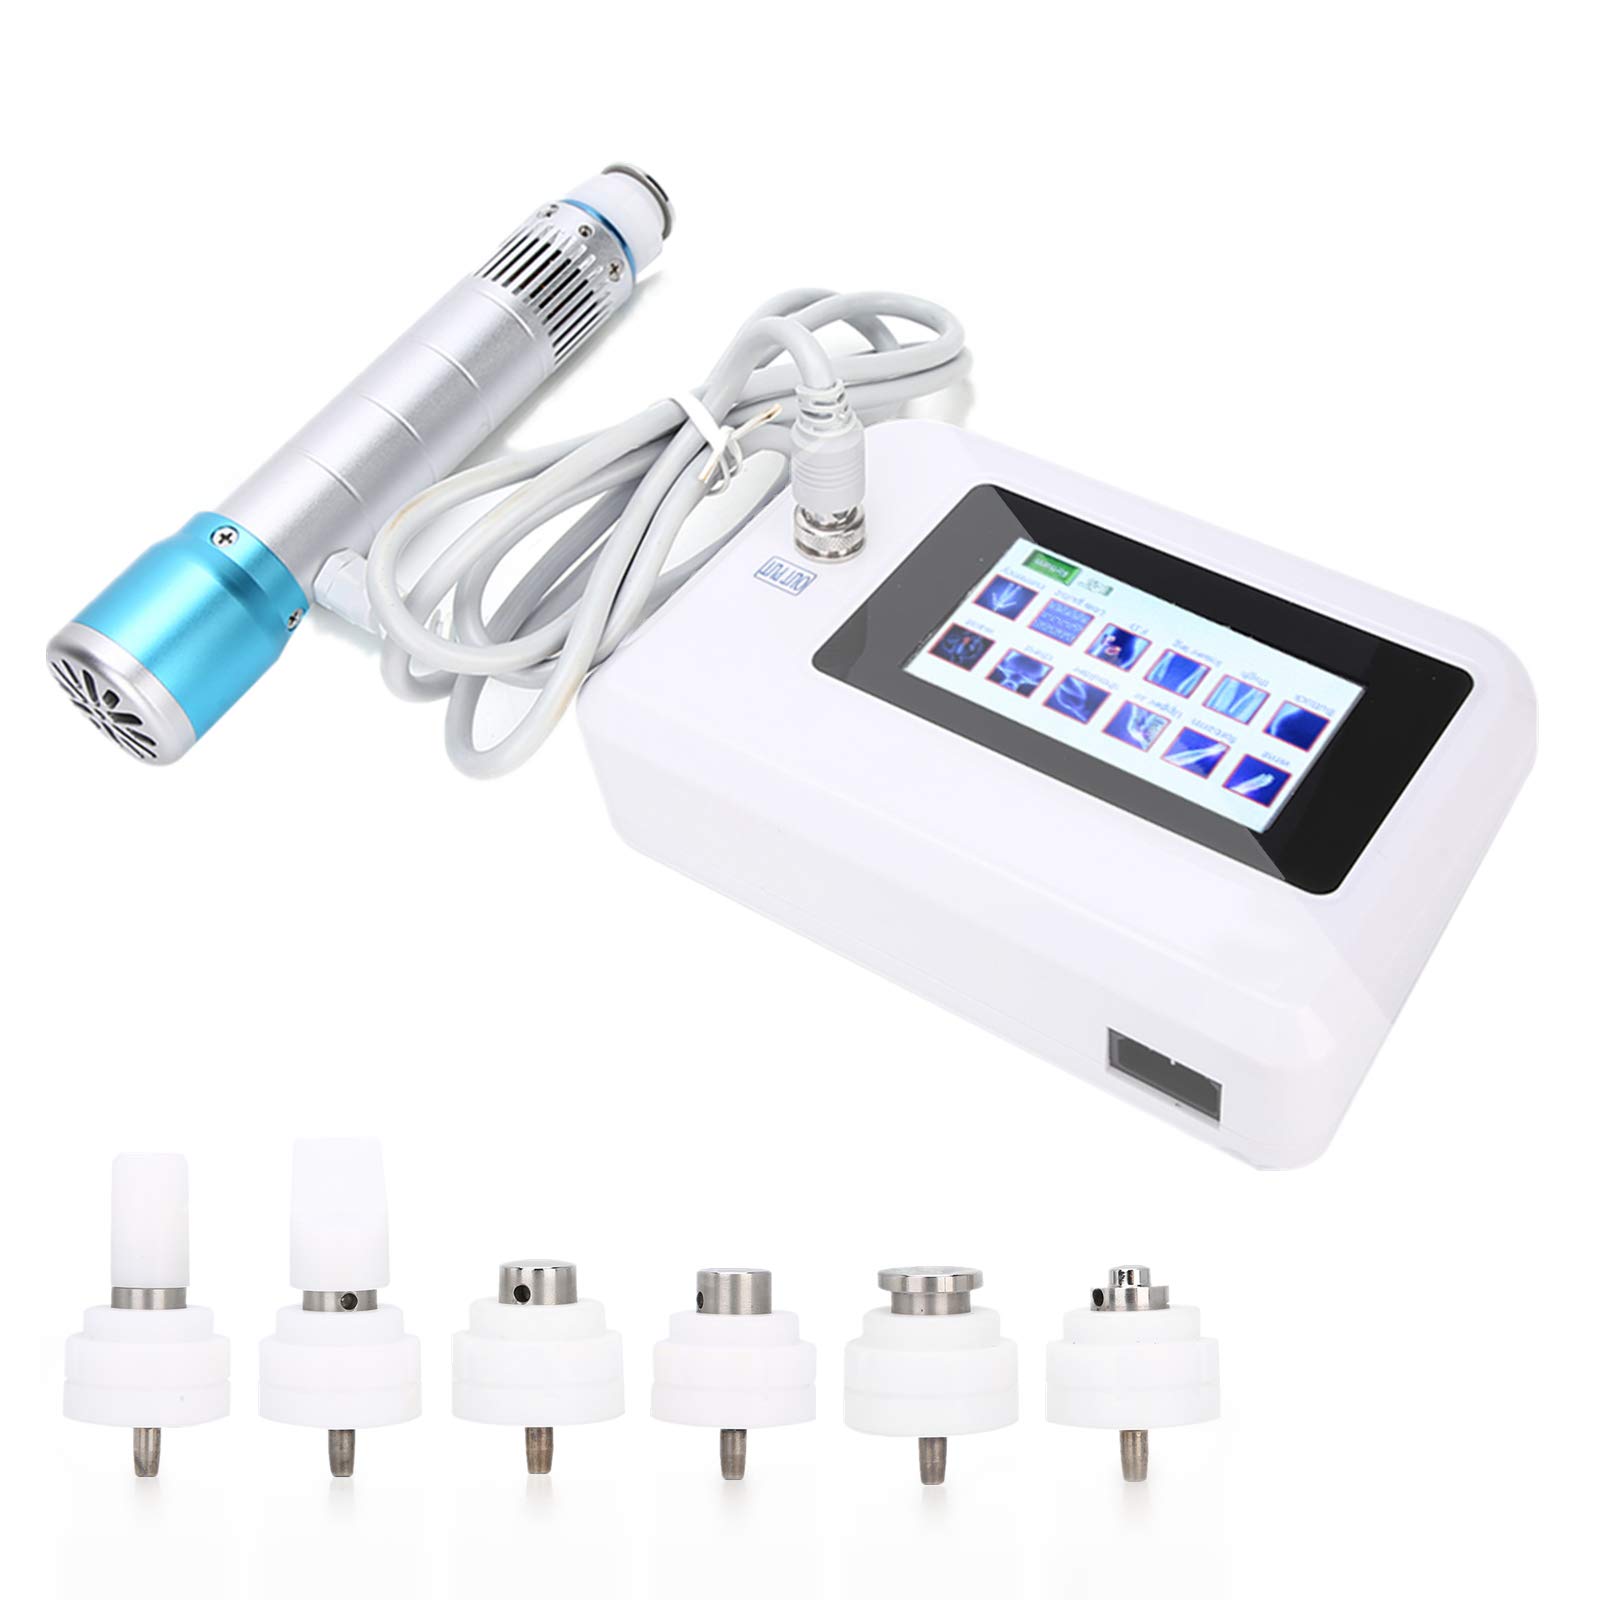 Shockwave Therapy Machine, ED Shock Waves Treatments Therapy Machine, Portable Shockwave Physiotherapy Instrument for Pain Relief Plantar Fasciitis...